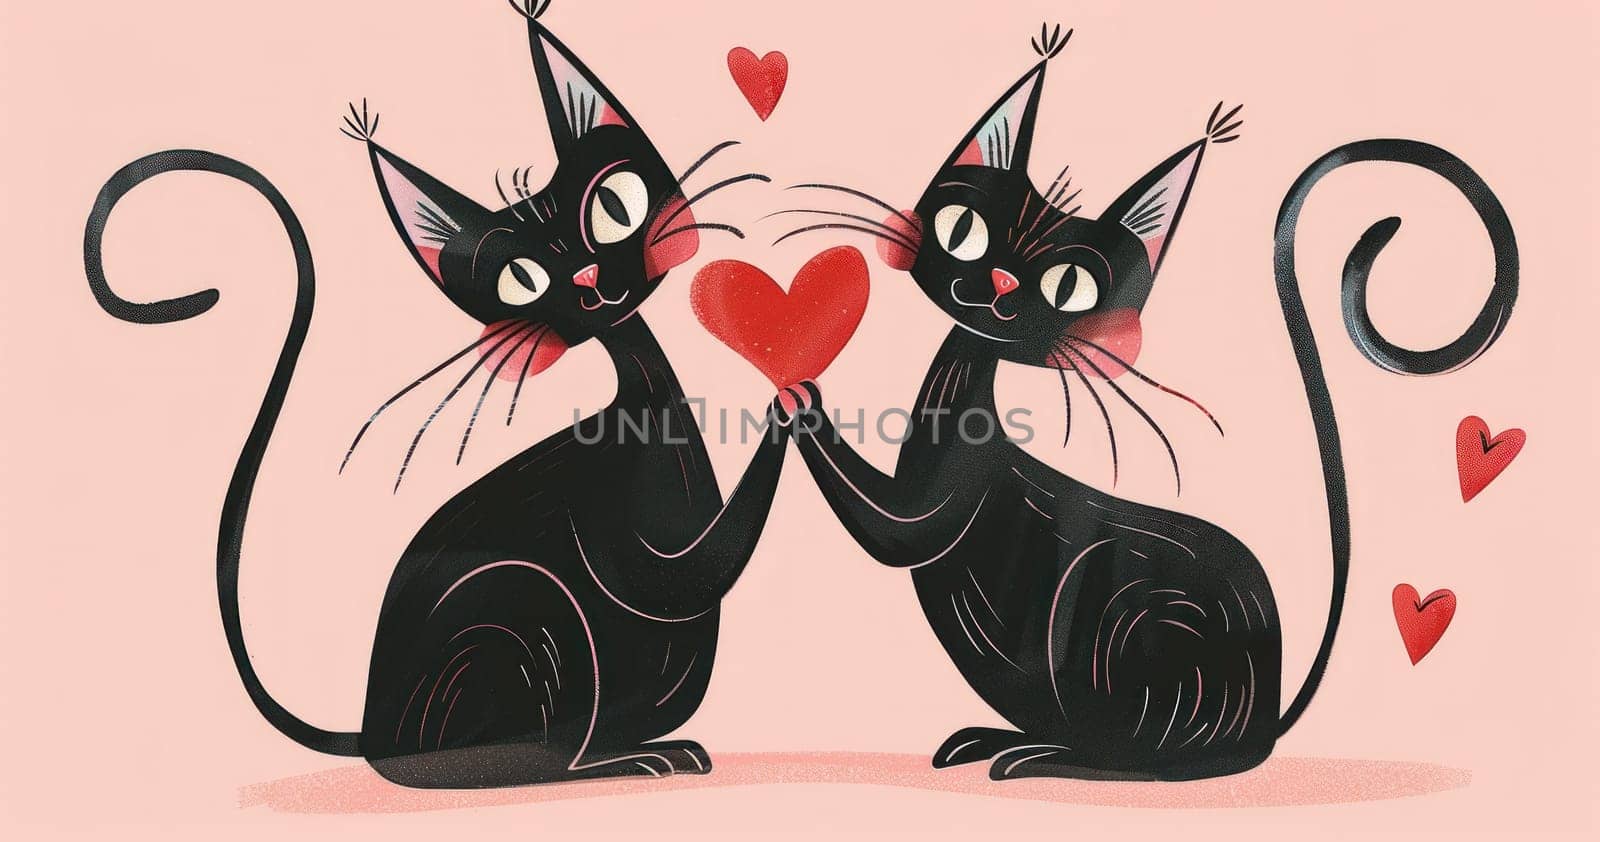 Romantic valentine's day illustration featuring two black cats holding heart shaped object surrounded by hearts